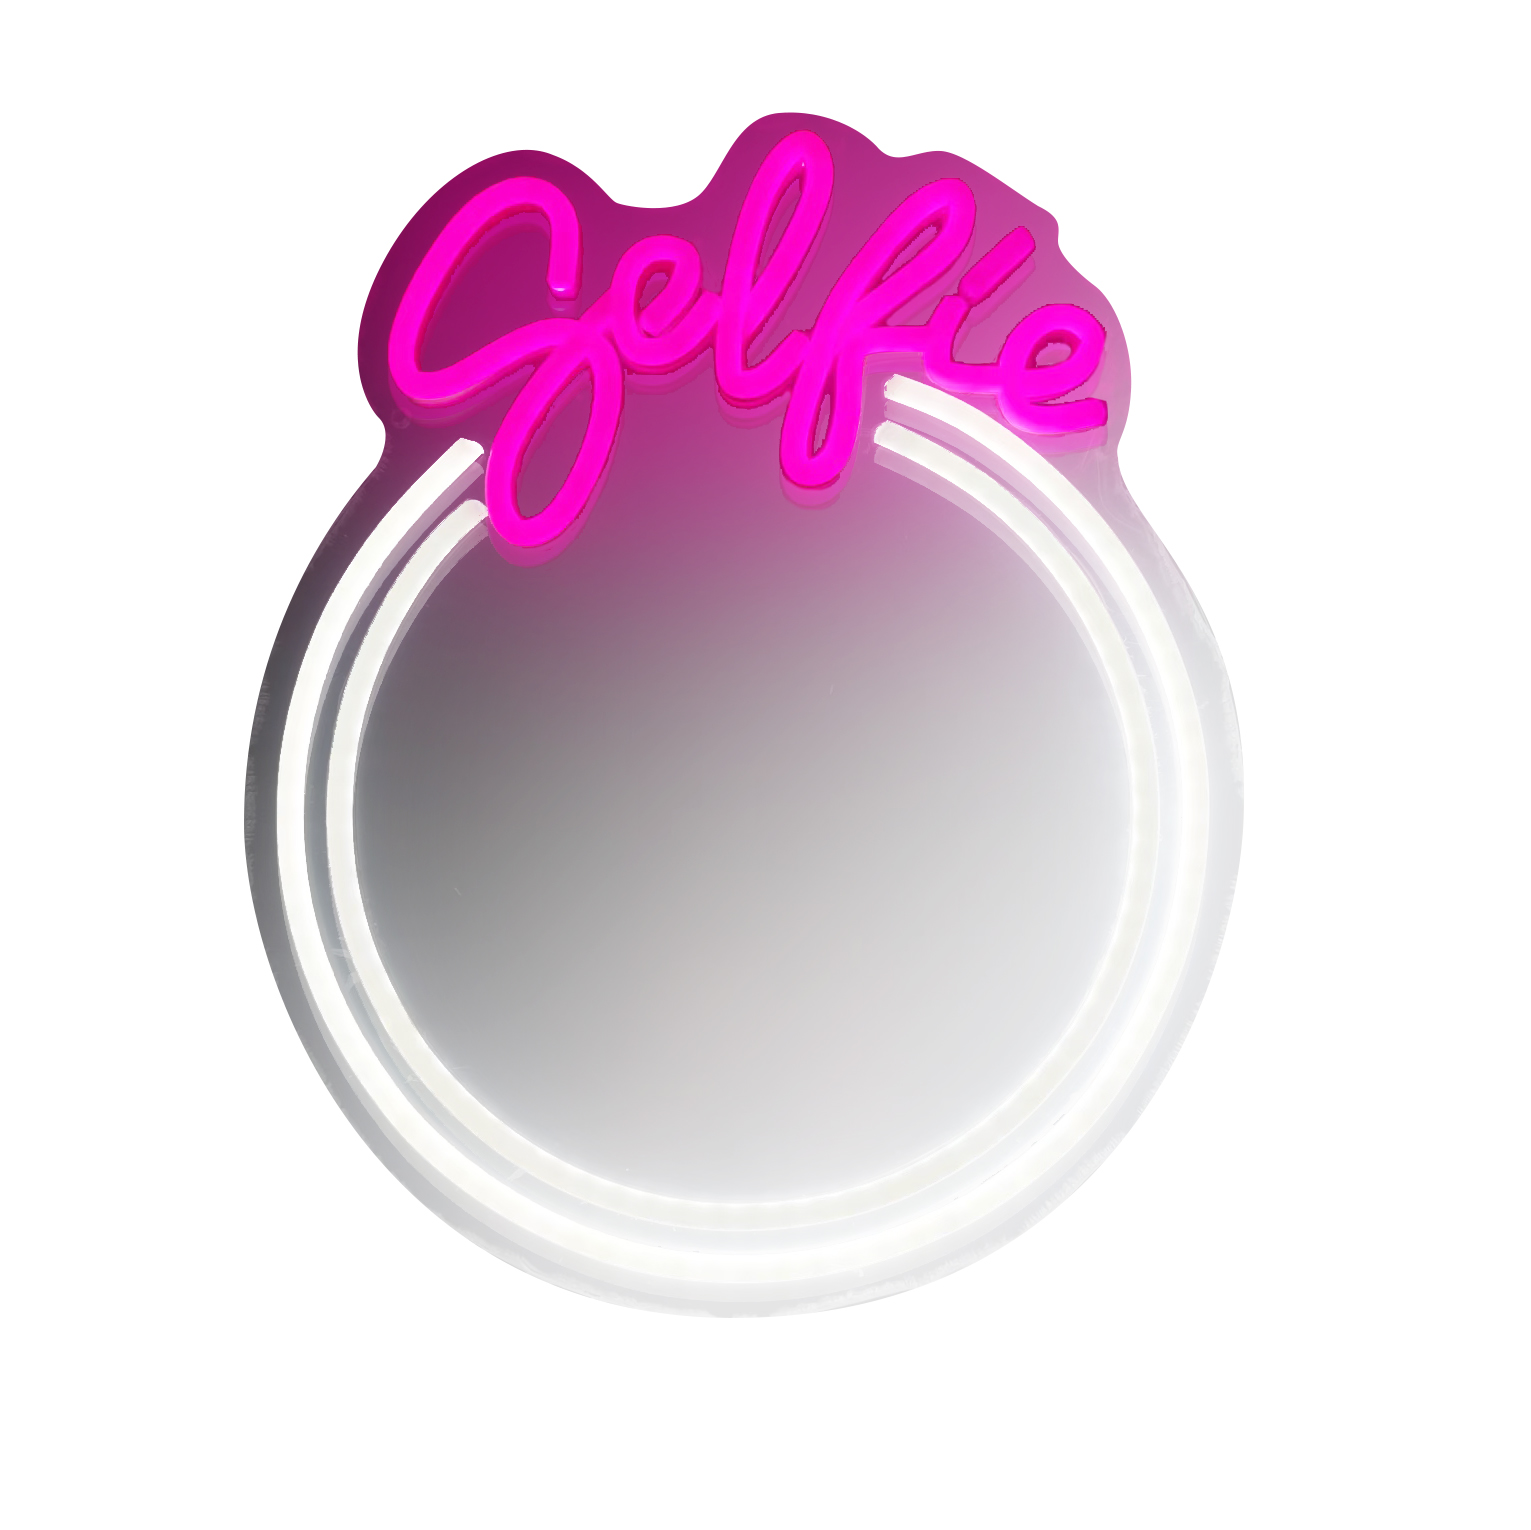 Selfie Neon Mirror for Wall Decor USB Powered